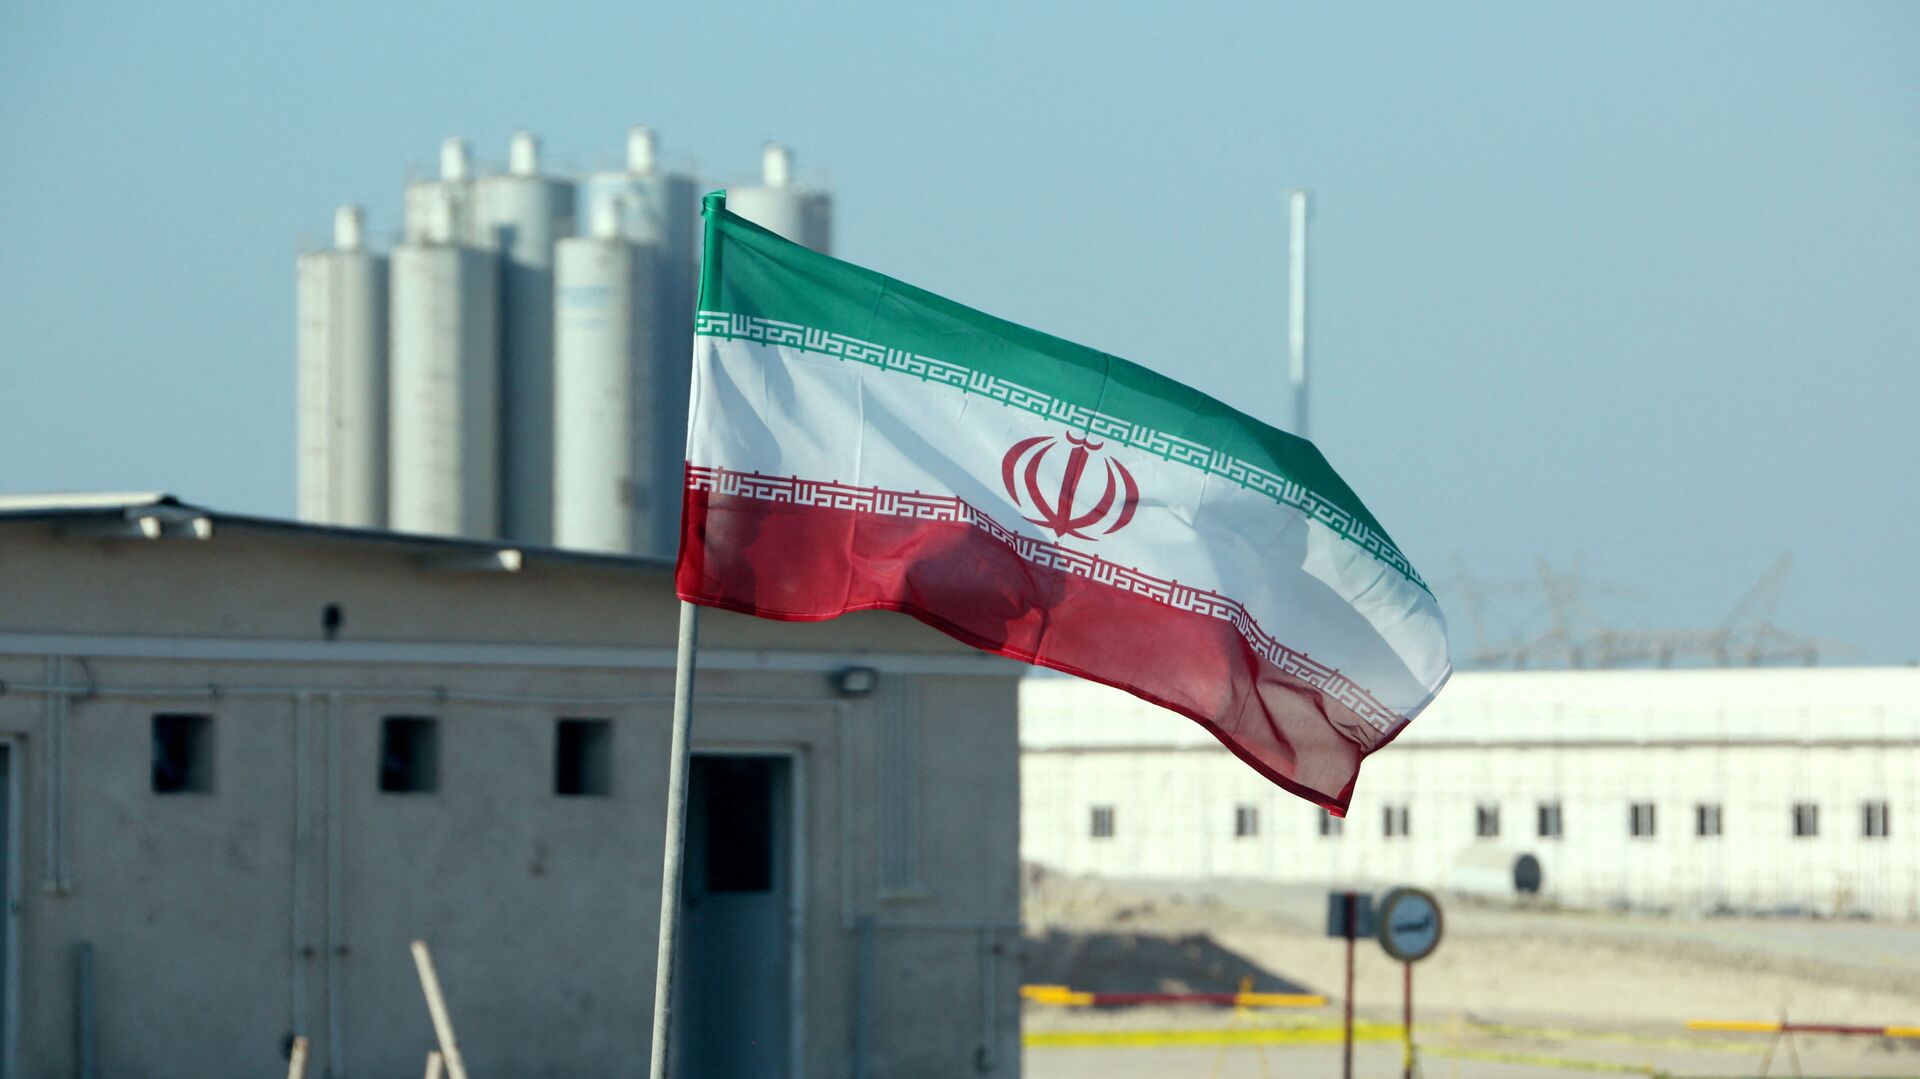 A picture taken on November 10, 2019, shows an Iranian flag in Iran's Bushehr nuclear power plant, during an official ceremony to kick-start works on a second reactor at the facility - Sputnik International, 1920, 02.10.2021